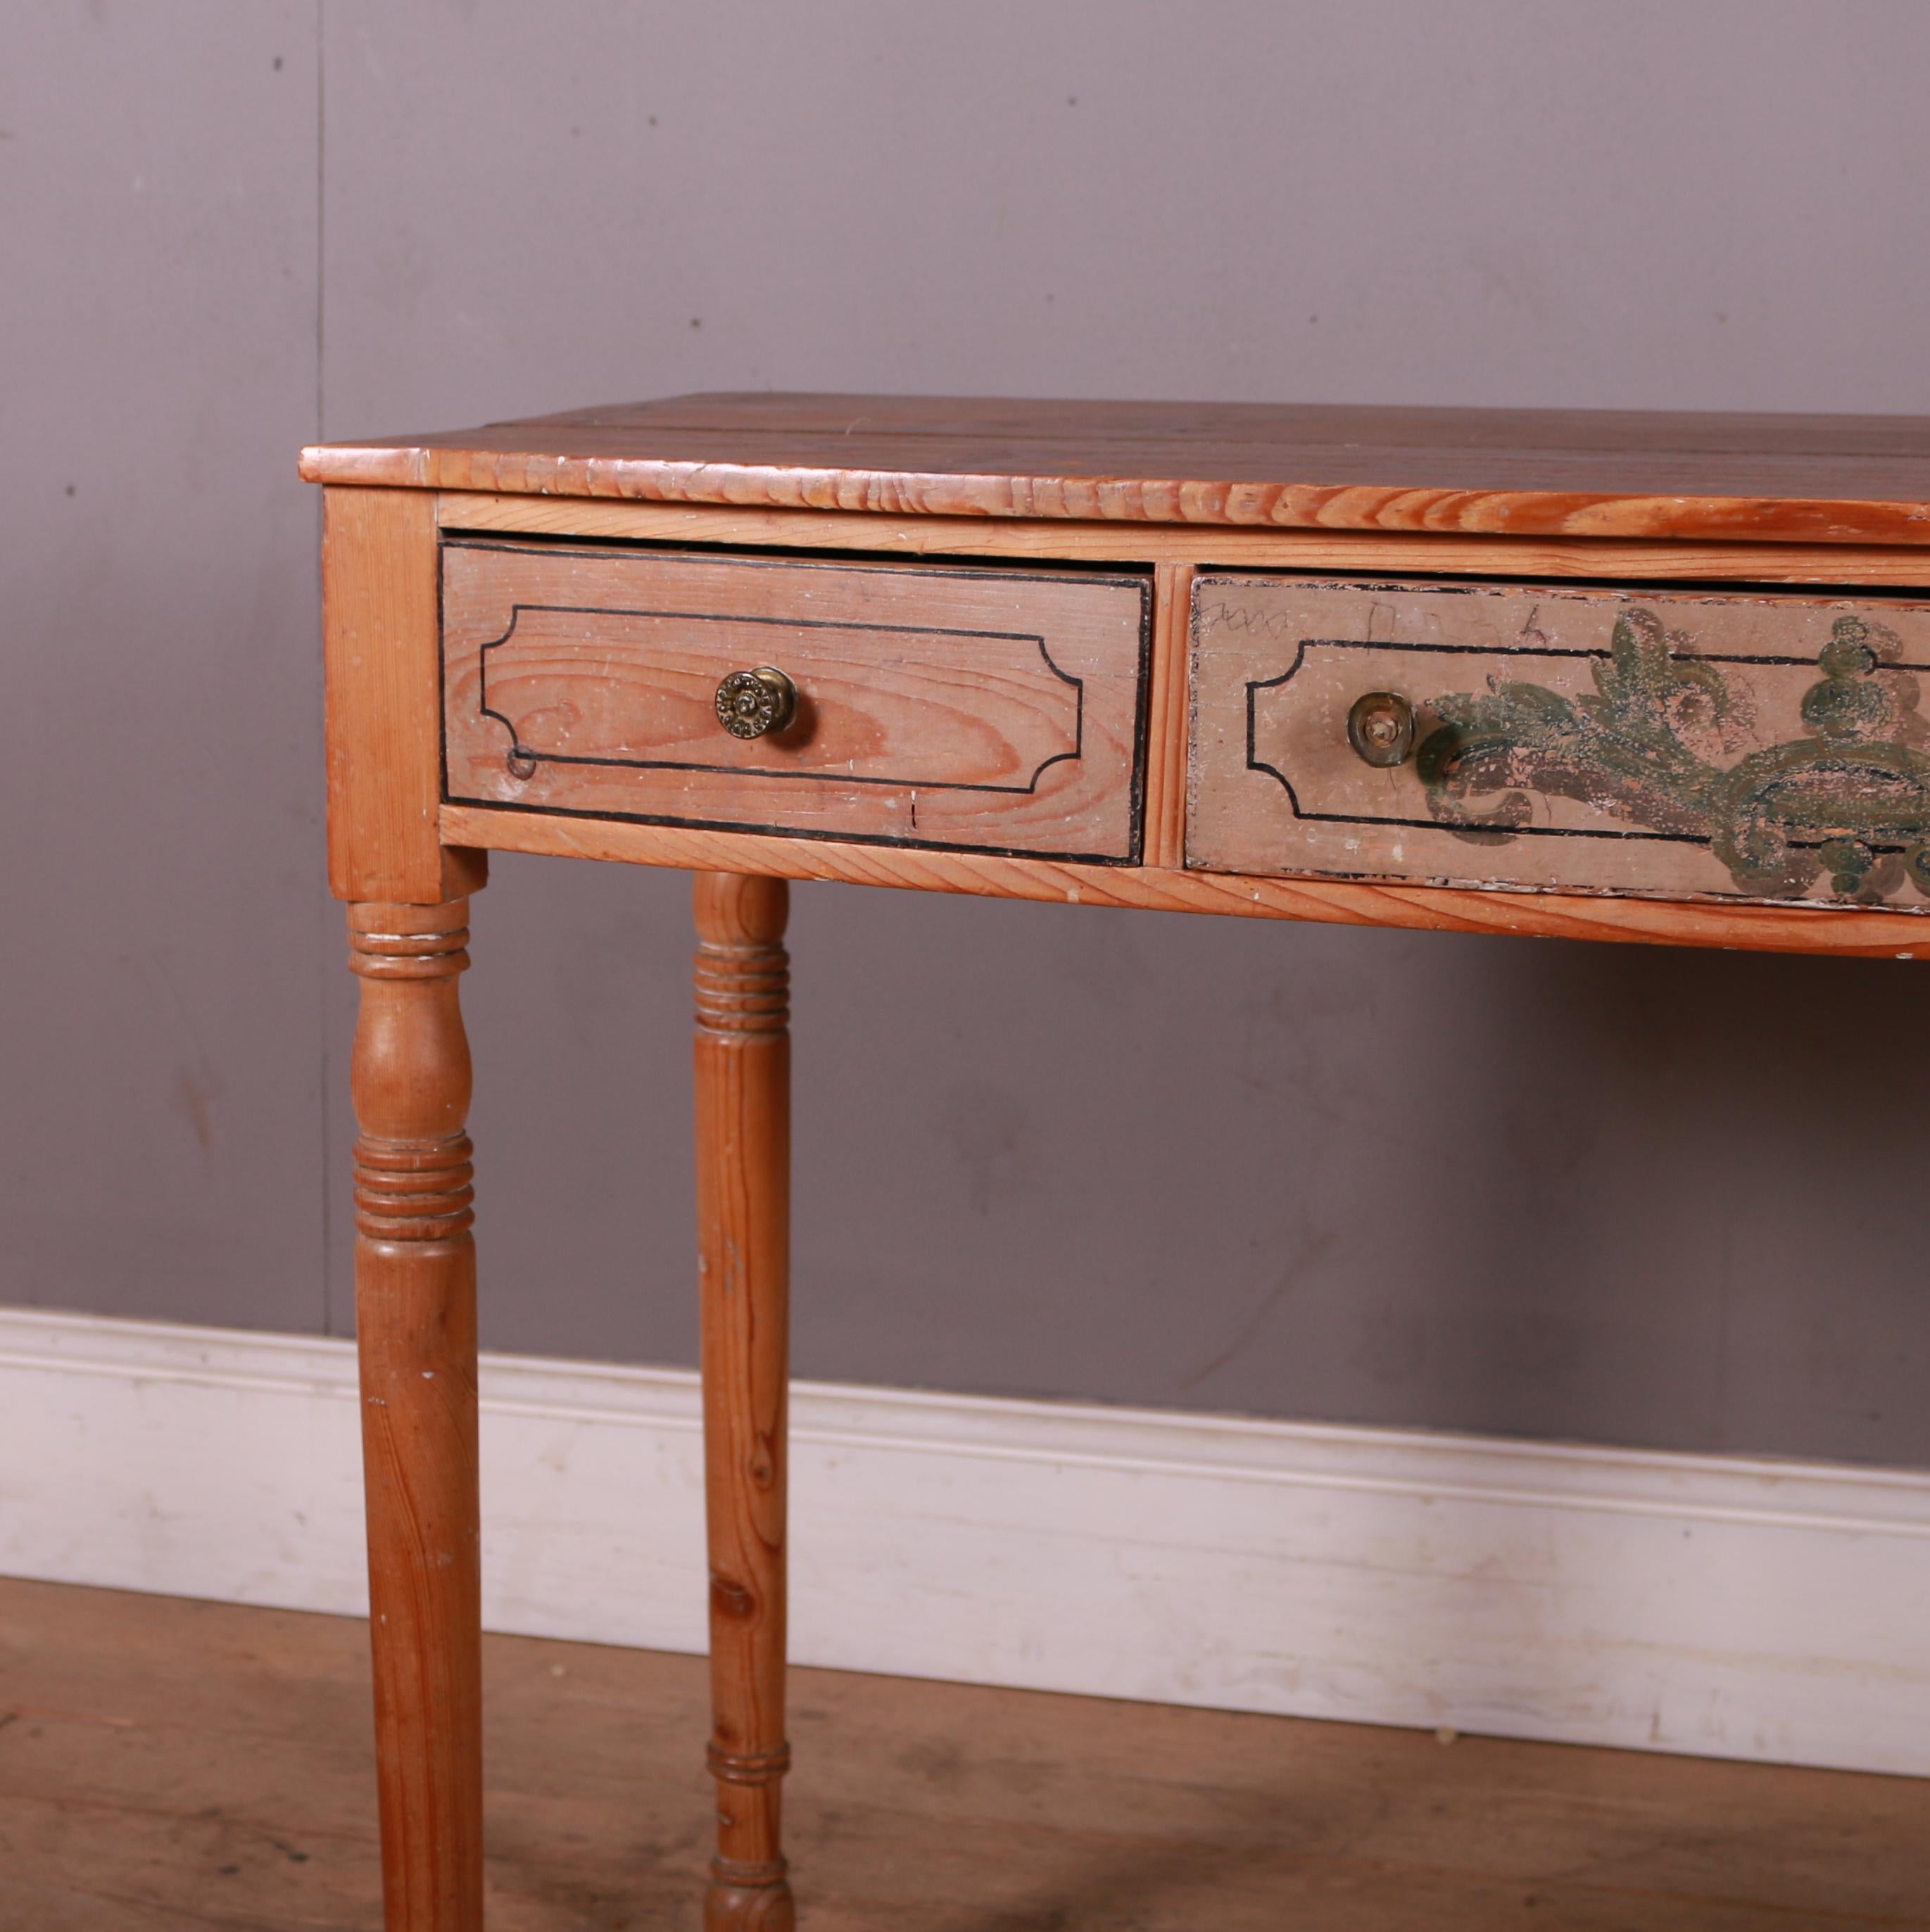 Early 19th C bowfronted pine lamp table / desk with traces of original paint. 1820.

Clearance is 24.5